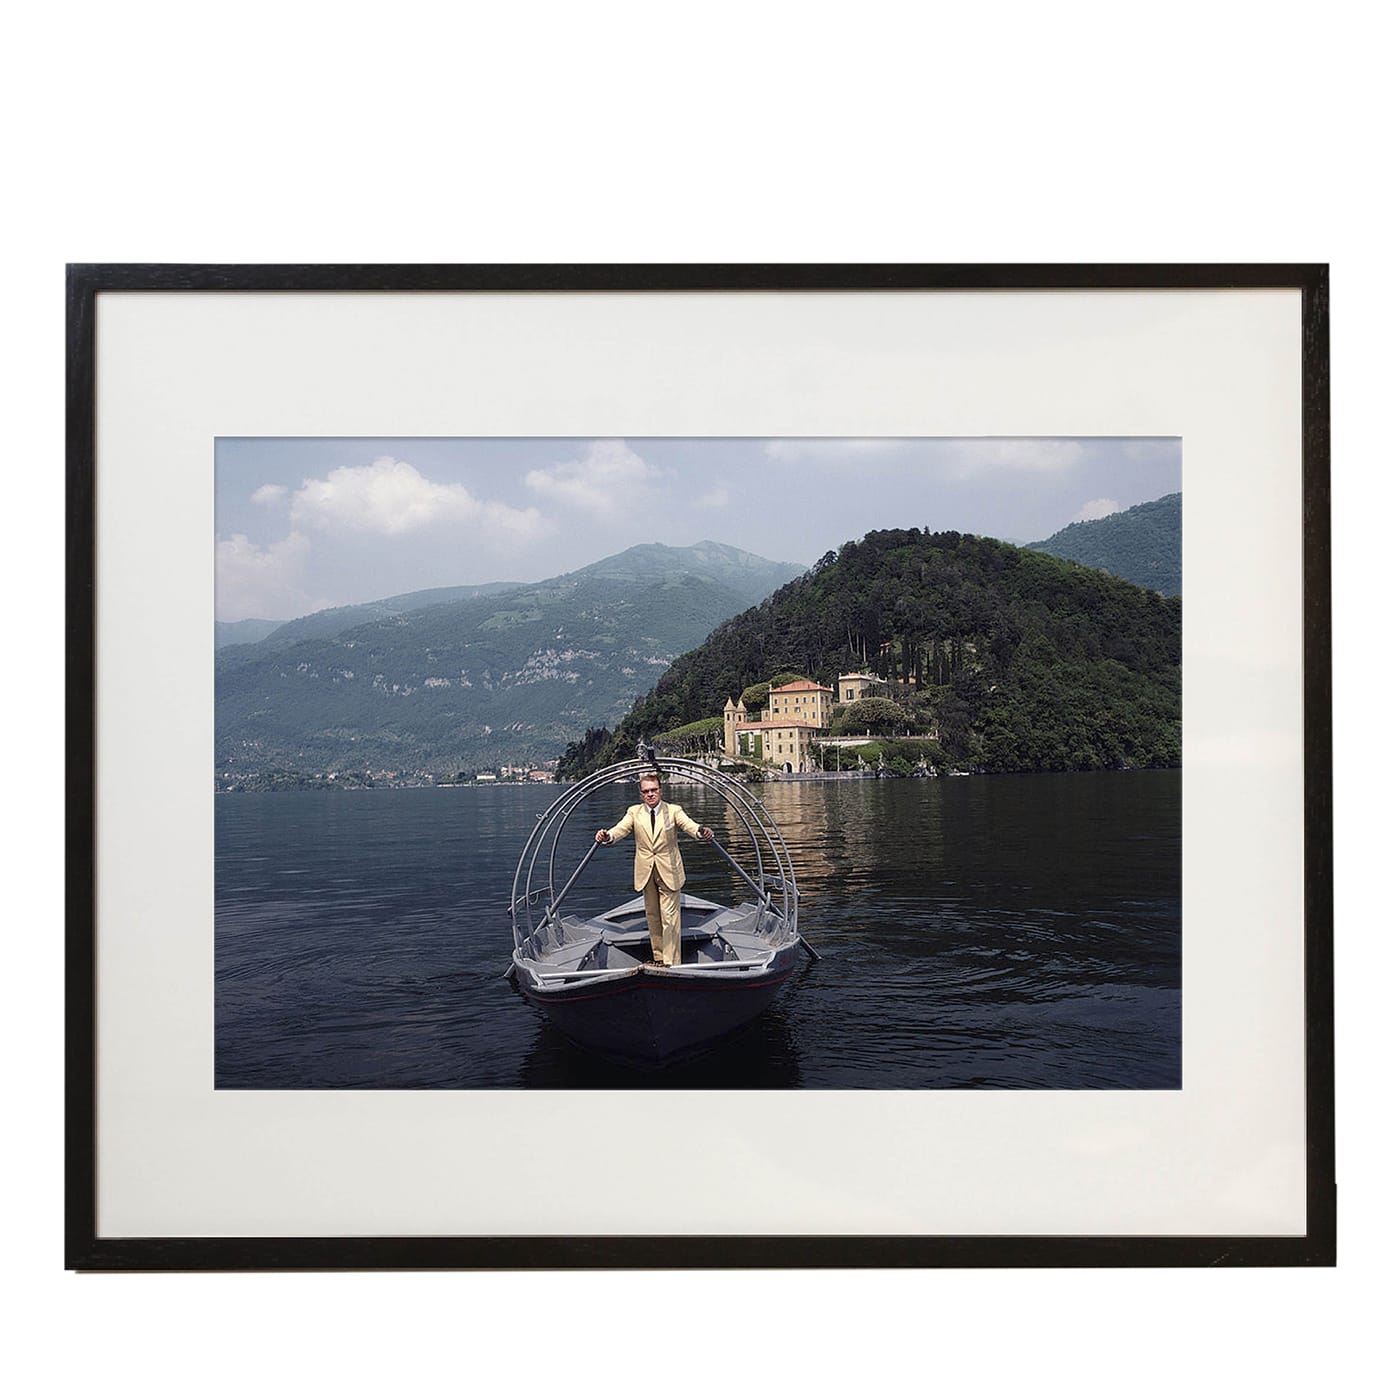 Count Guido Monzino Small Framed Print - Getty Images